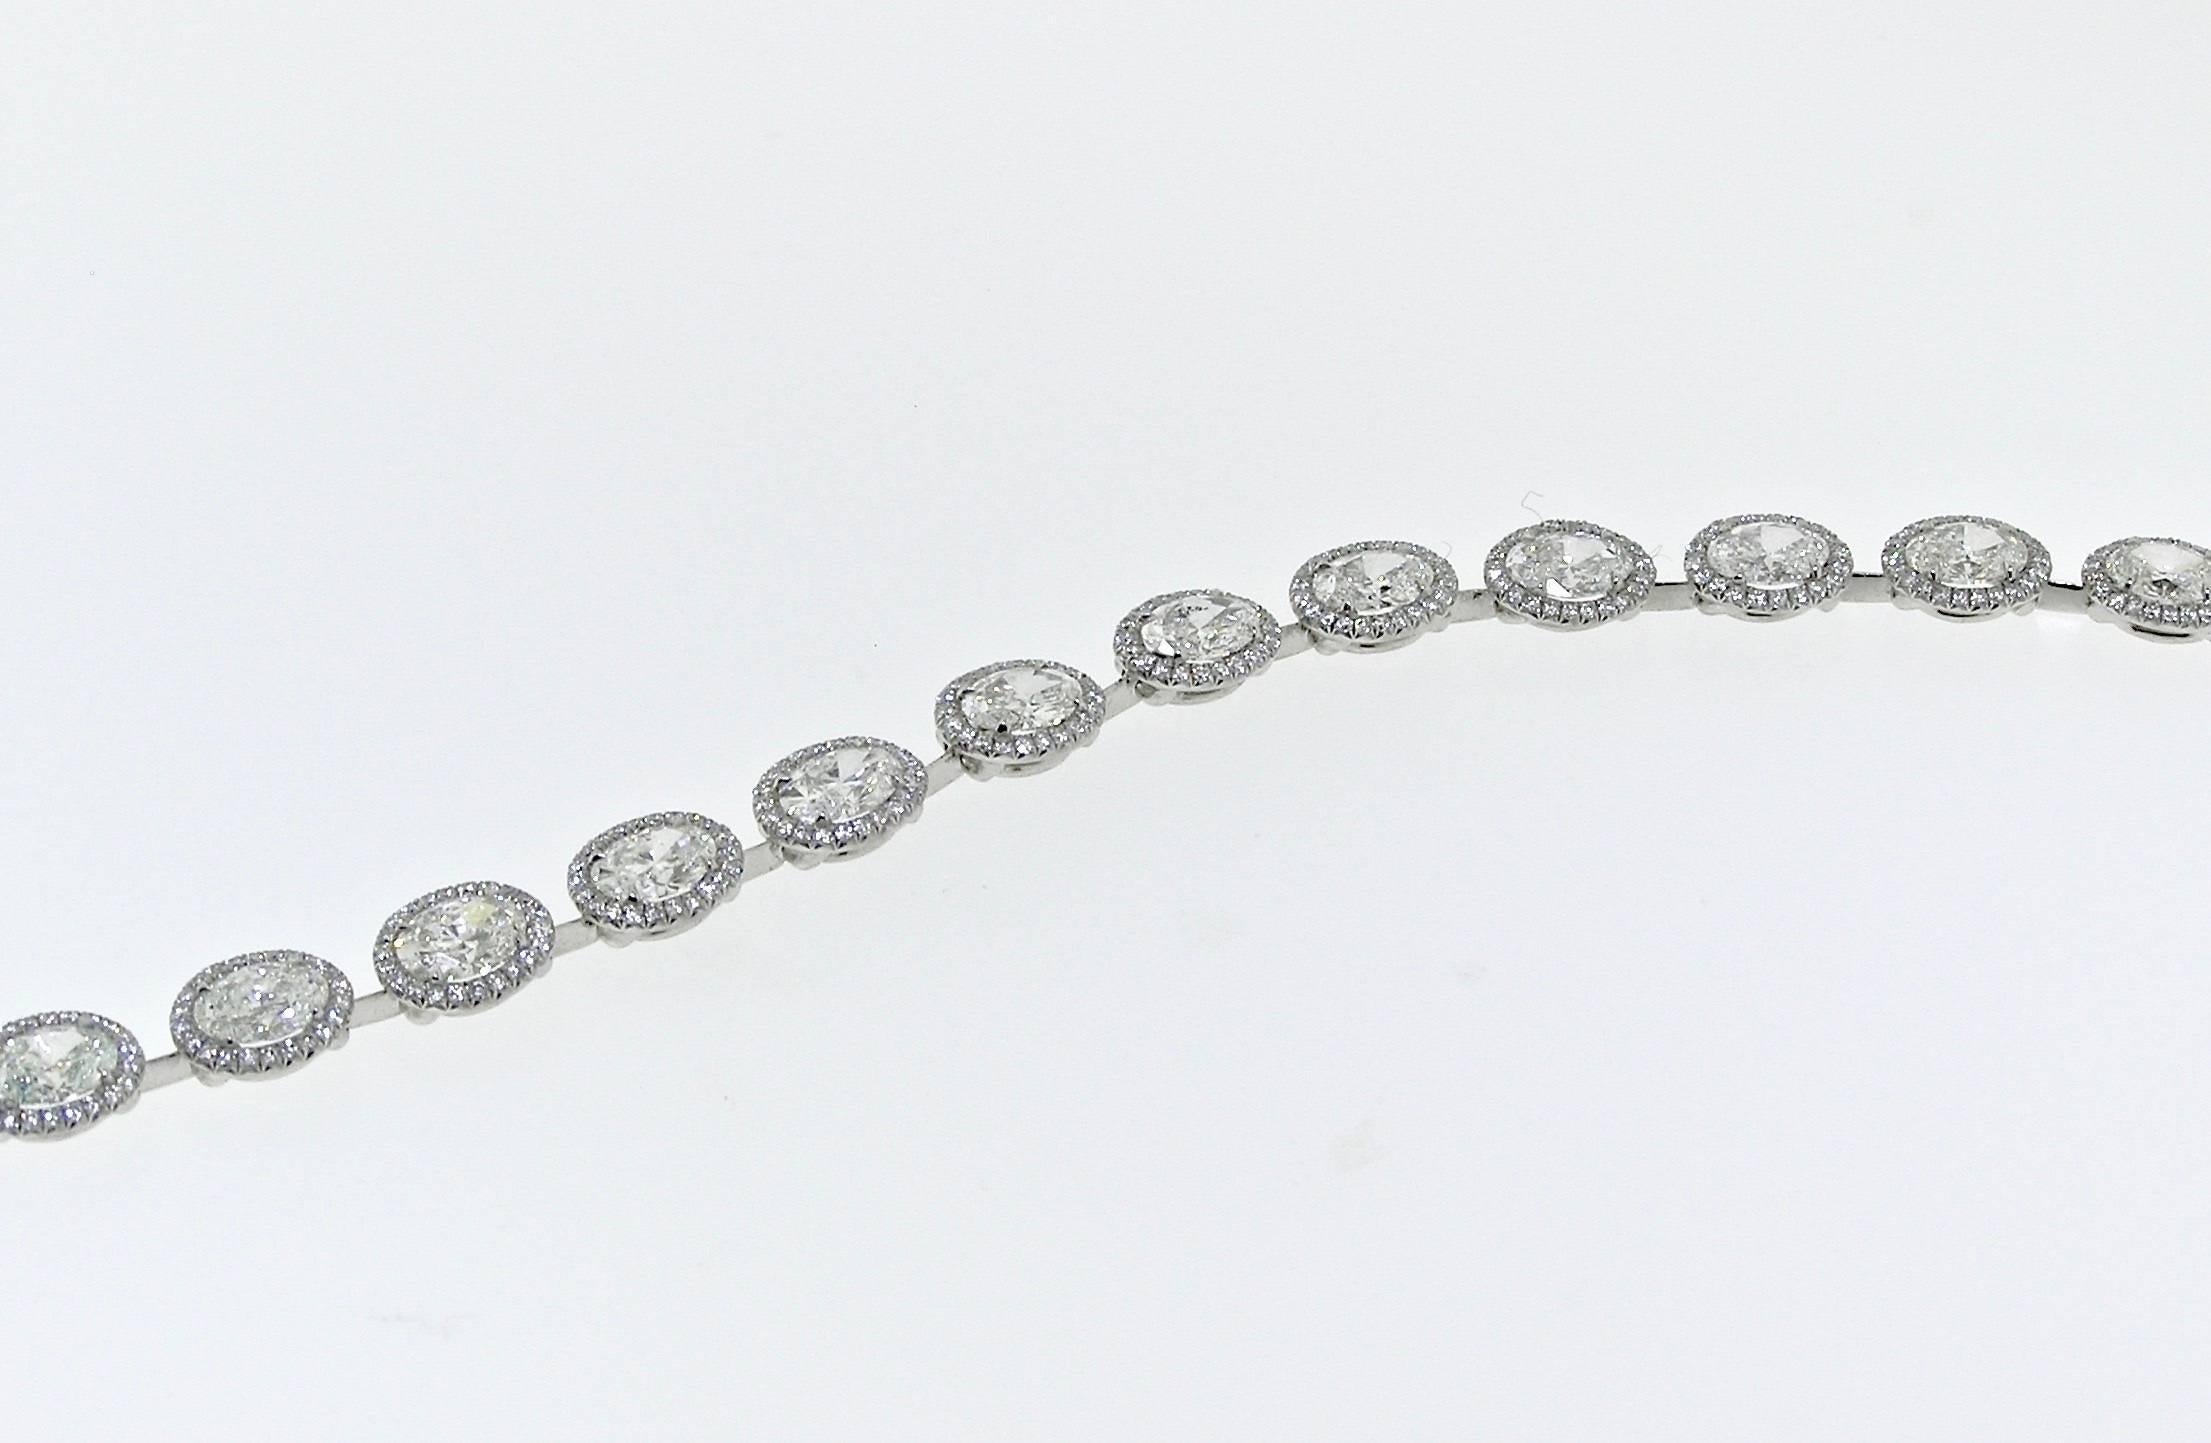 This exquisite piece in Platinum has 17 approximately .50 Carats each Oval cut Diamonds with round Diamond accents.  10 Carats total. Diamonds are of G Color, VS Clarity. Each link is fully articulated, and the piece lays beautifully on the